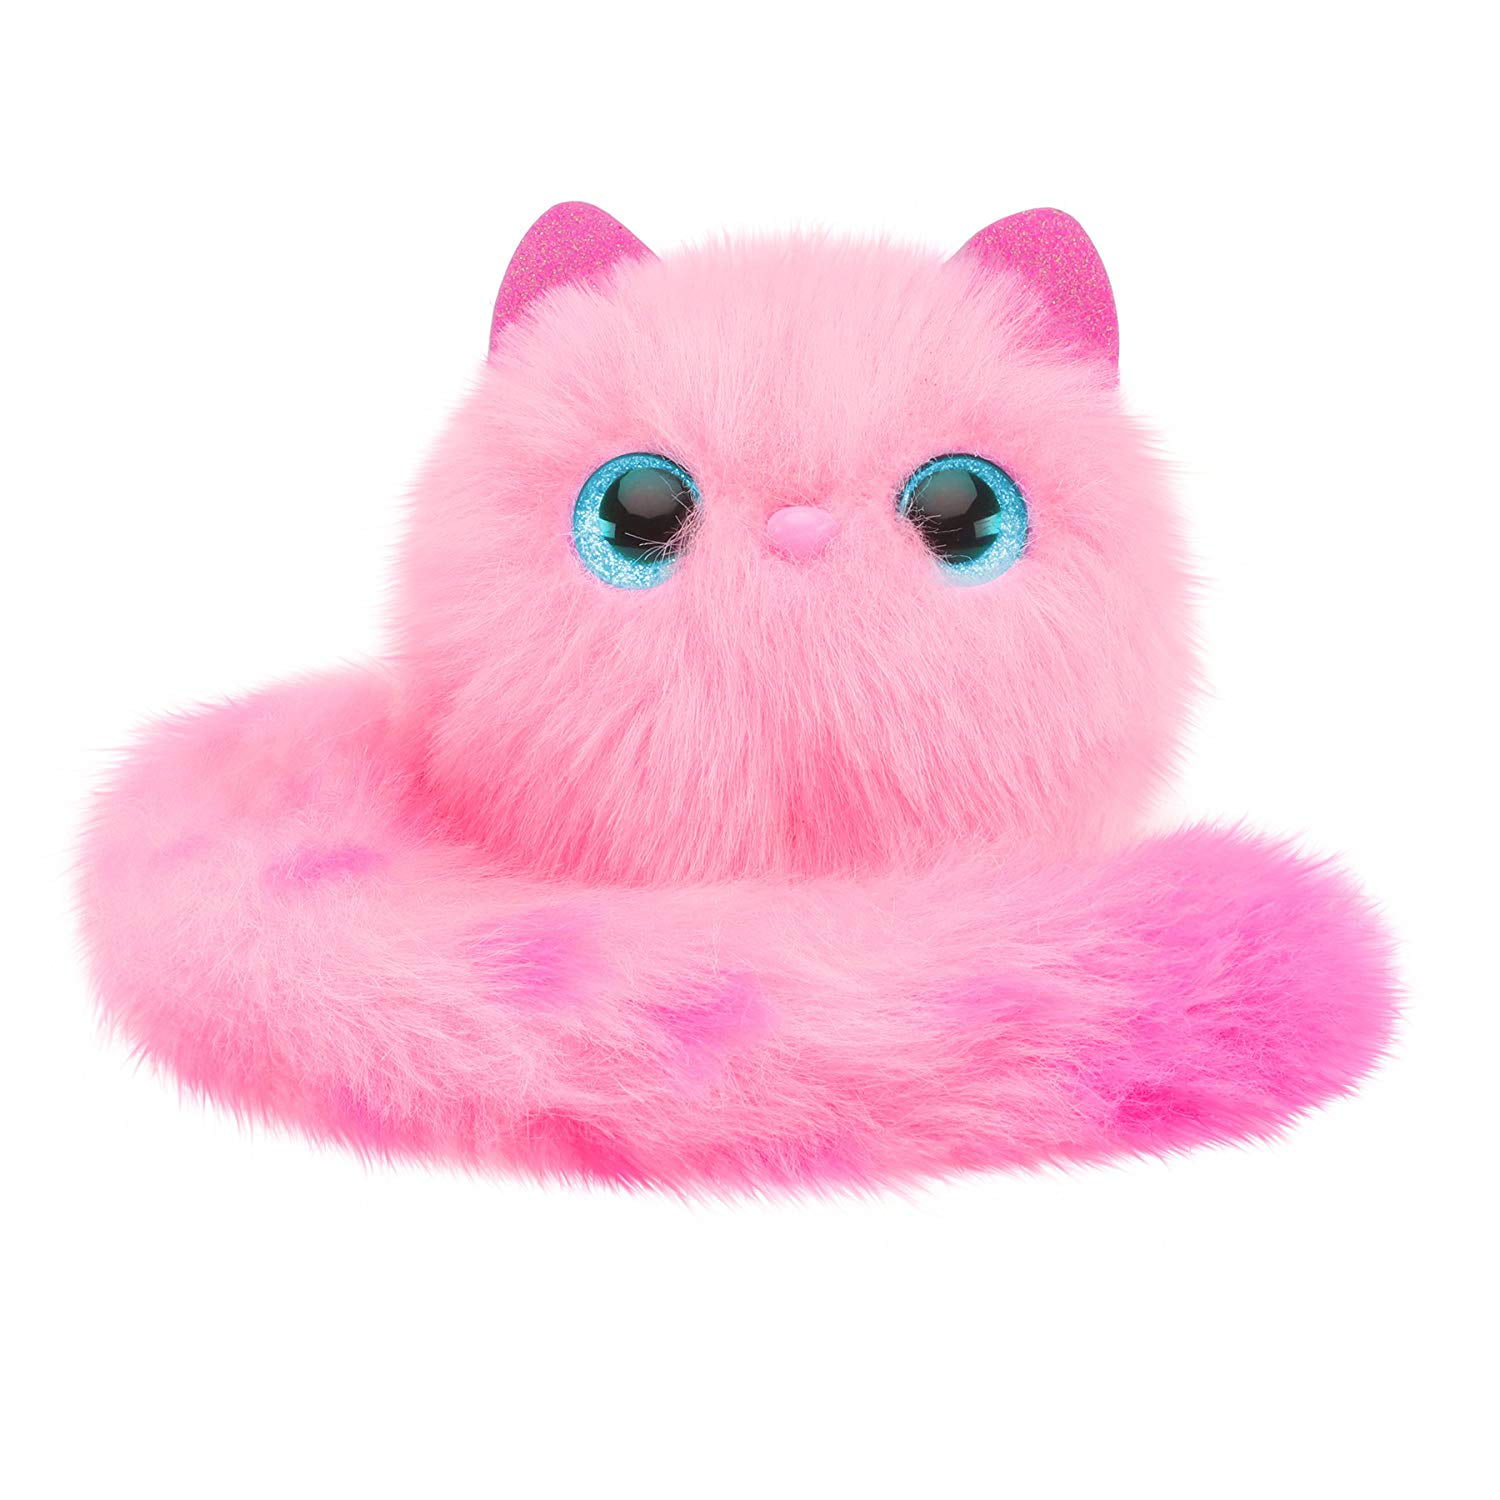 Pink PLUSH WEARABLE PET CAT with Light Up Eyes & Sounds REAL POMSIES BLOSSOM 